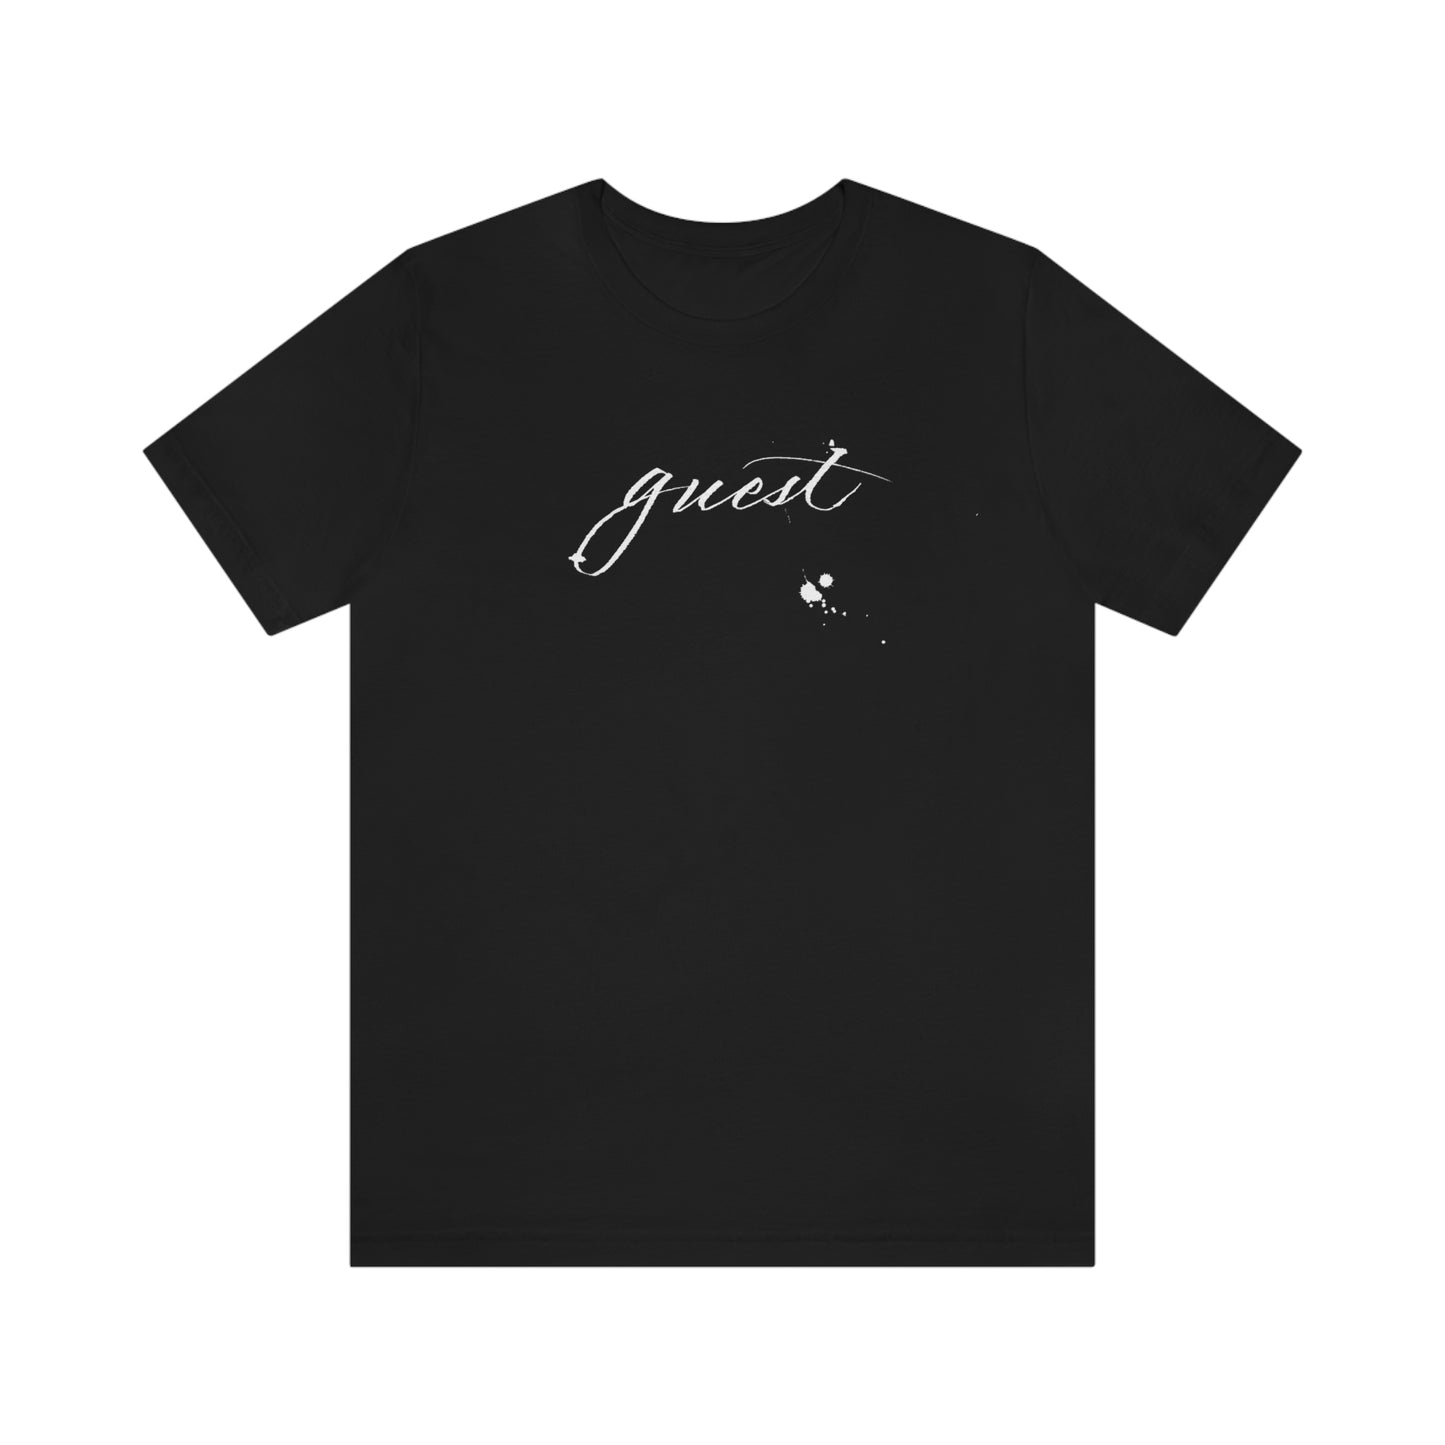 "Guest" Mixed Messages Unisex Tee